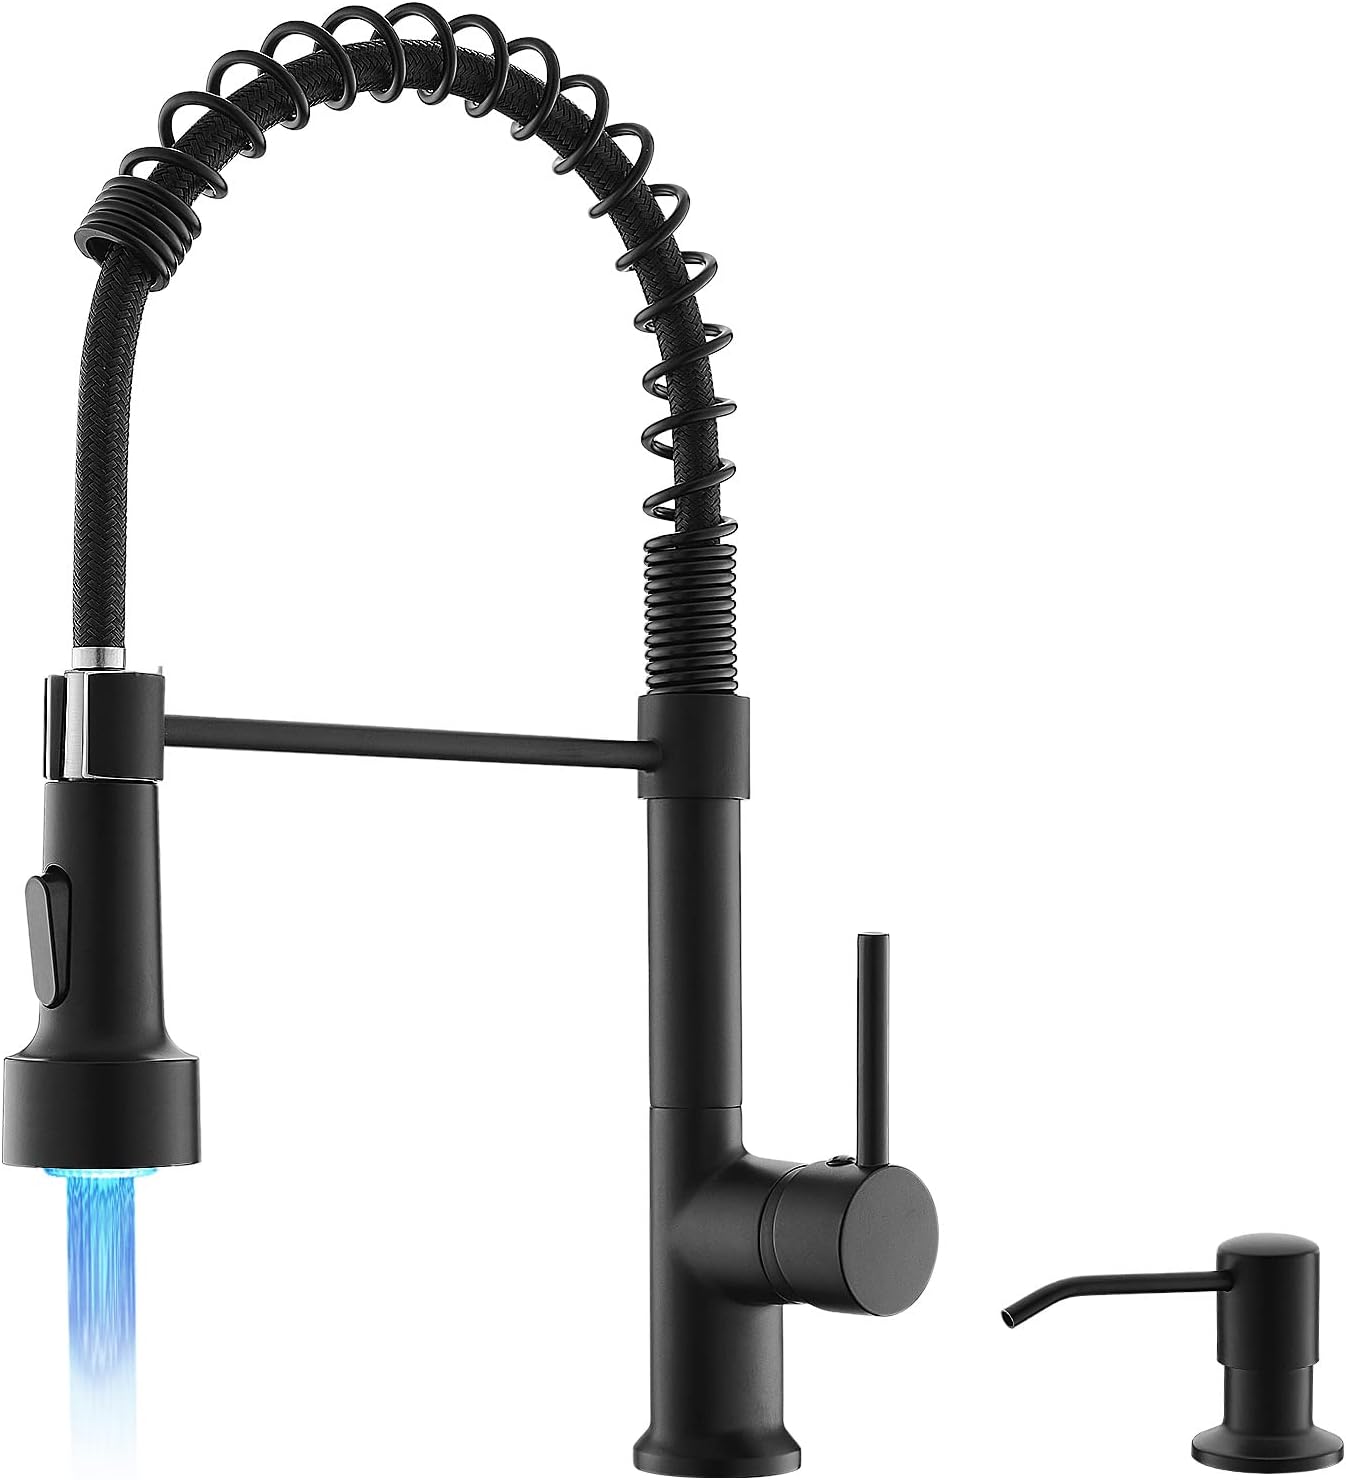 GIMILI Matte Black LED Kitchen Faucet with Soap Dispenser, Modern Single Handle Spring Kitchen Sink Faucets with Pull Down Sprayer